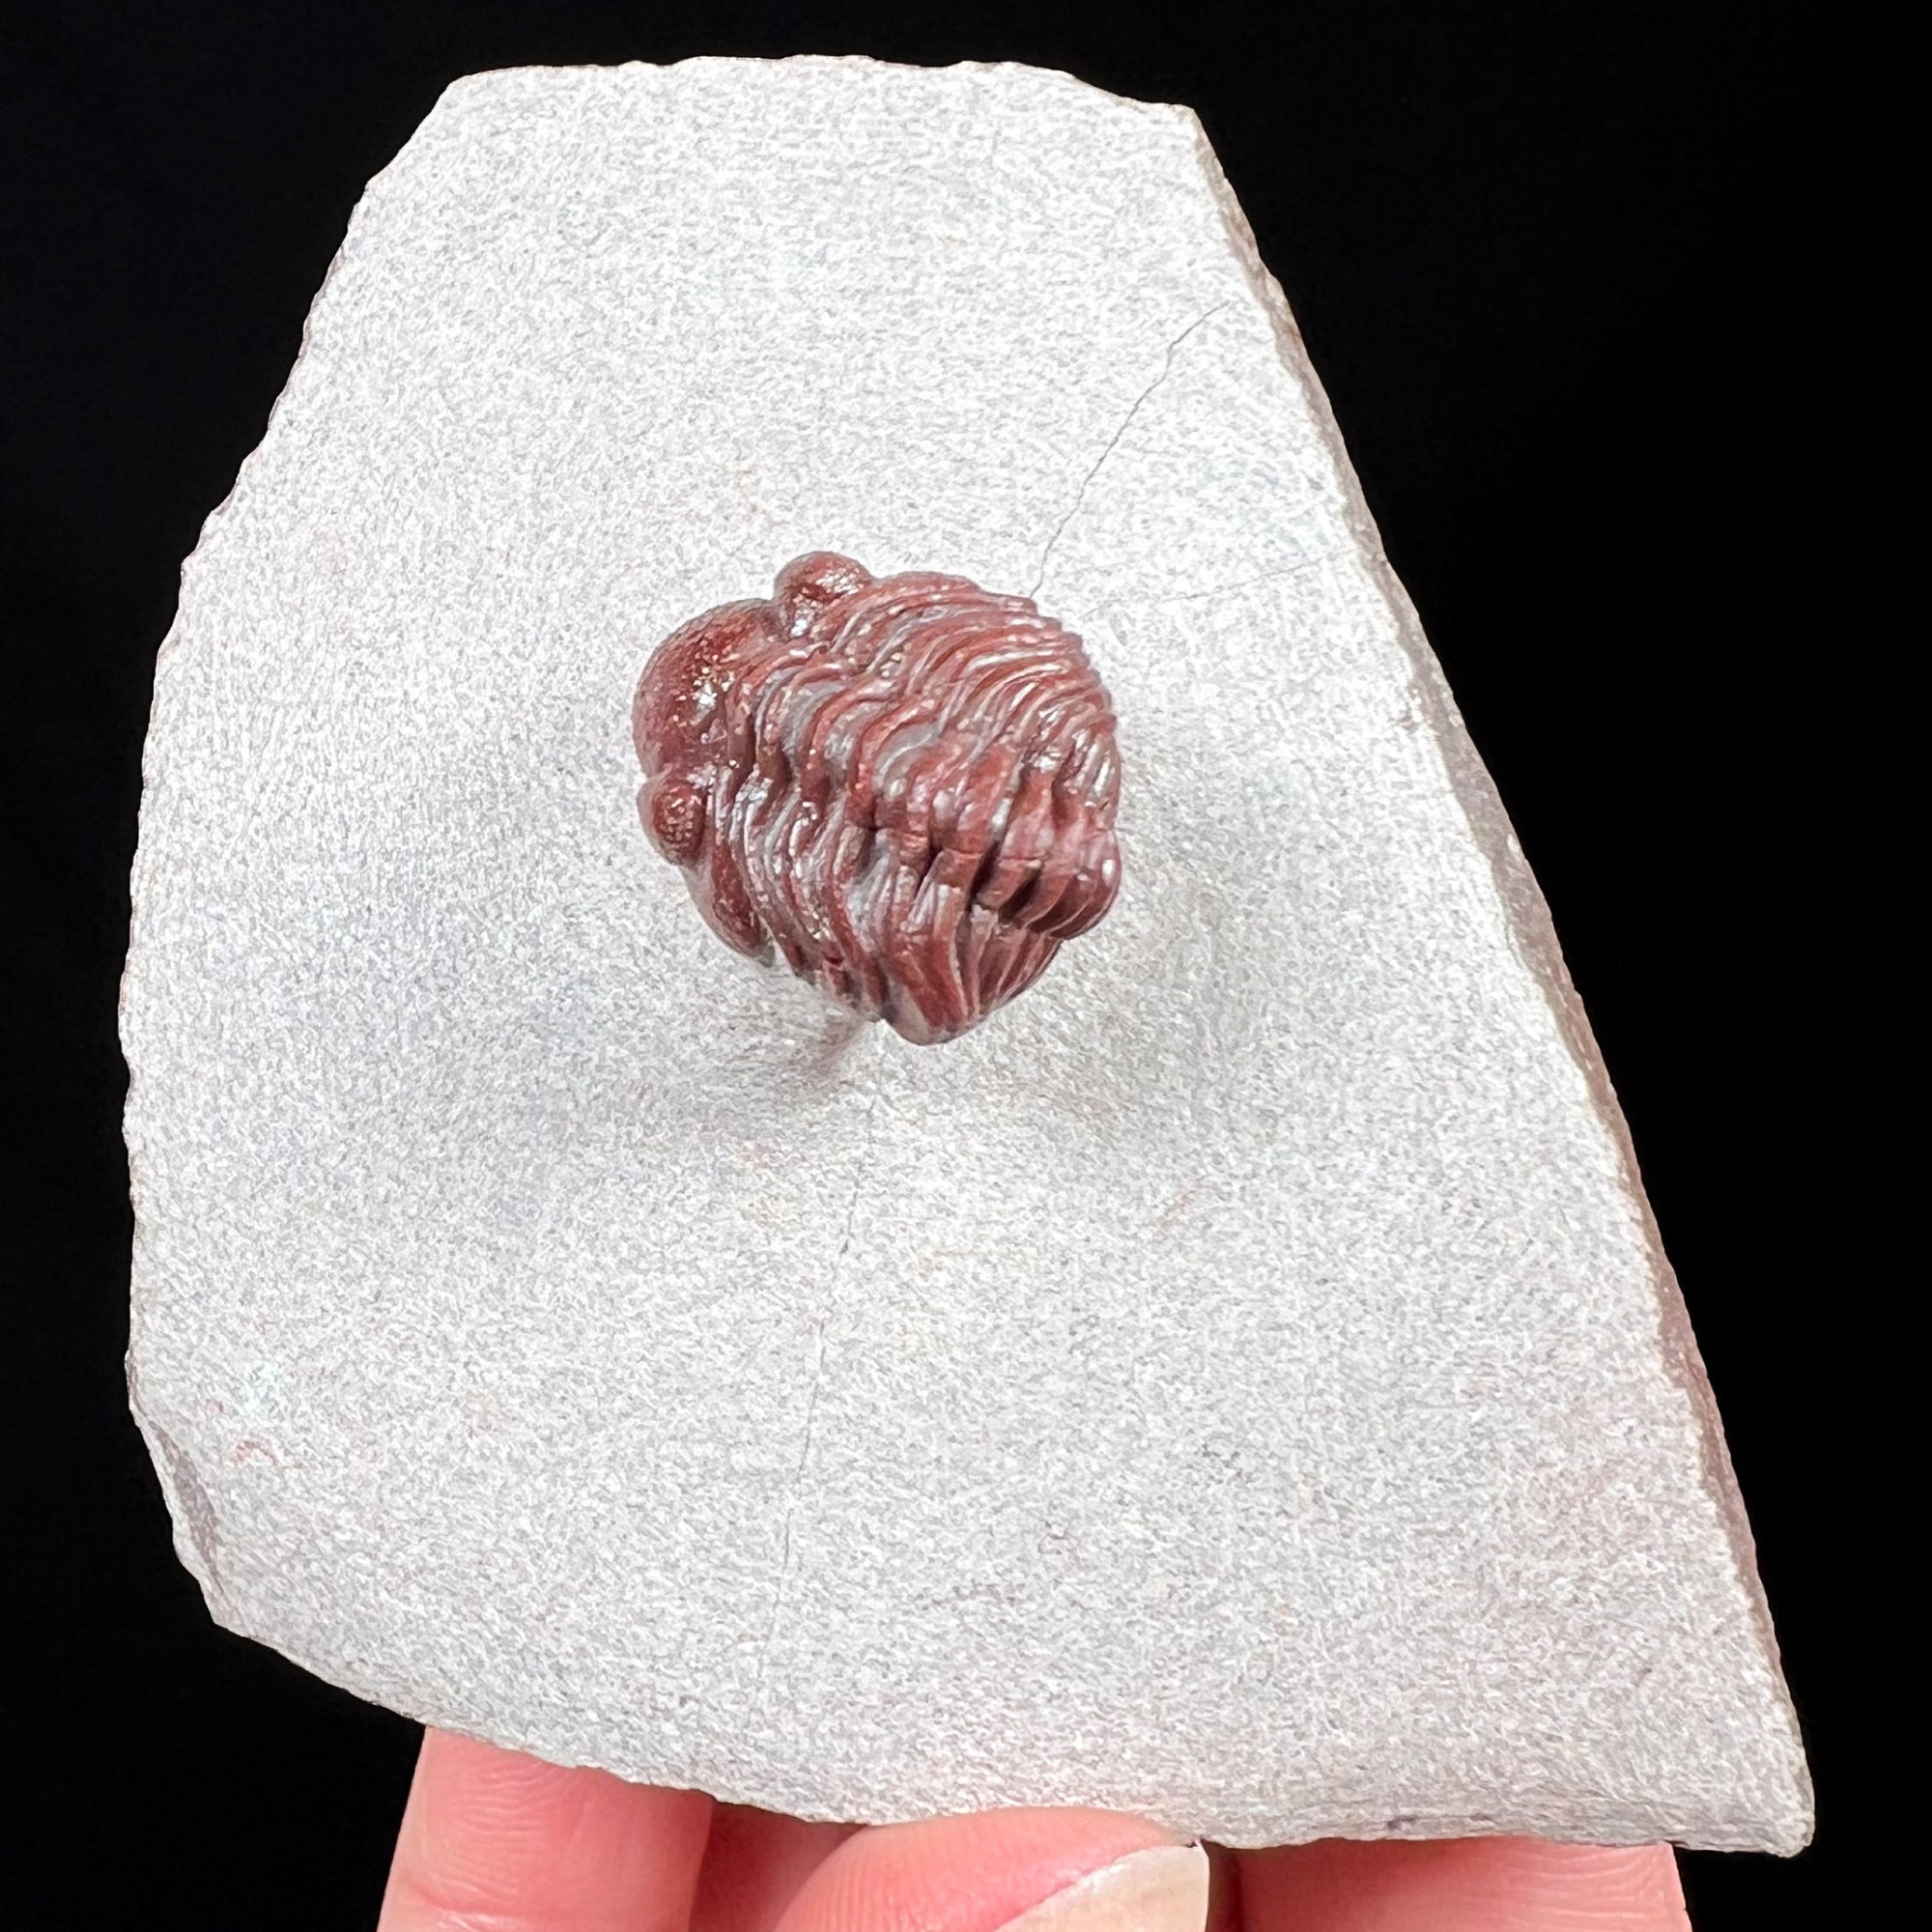 Fossil Trilobite - Austerops sp. from Morocco